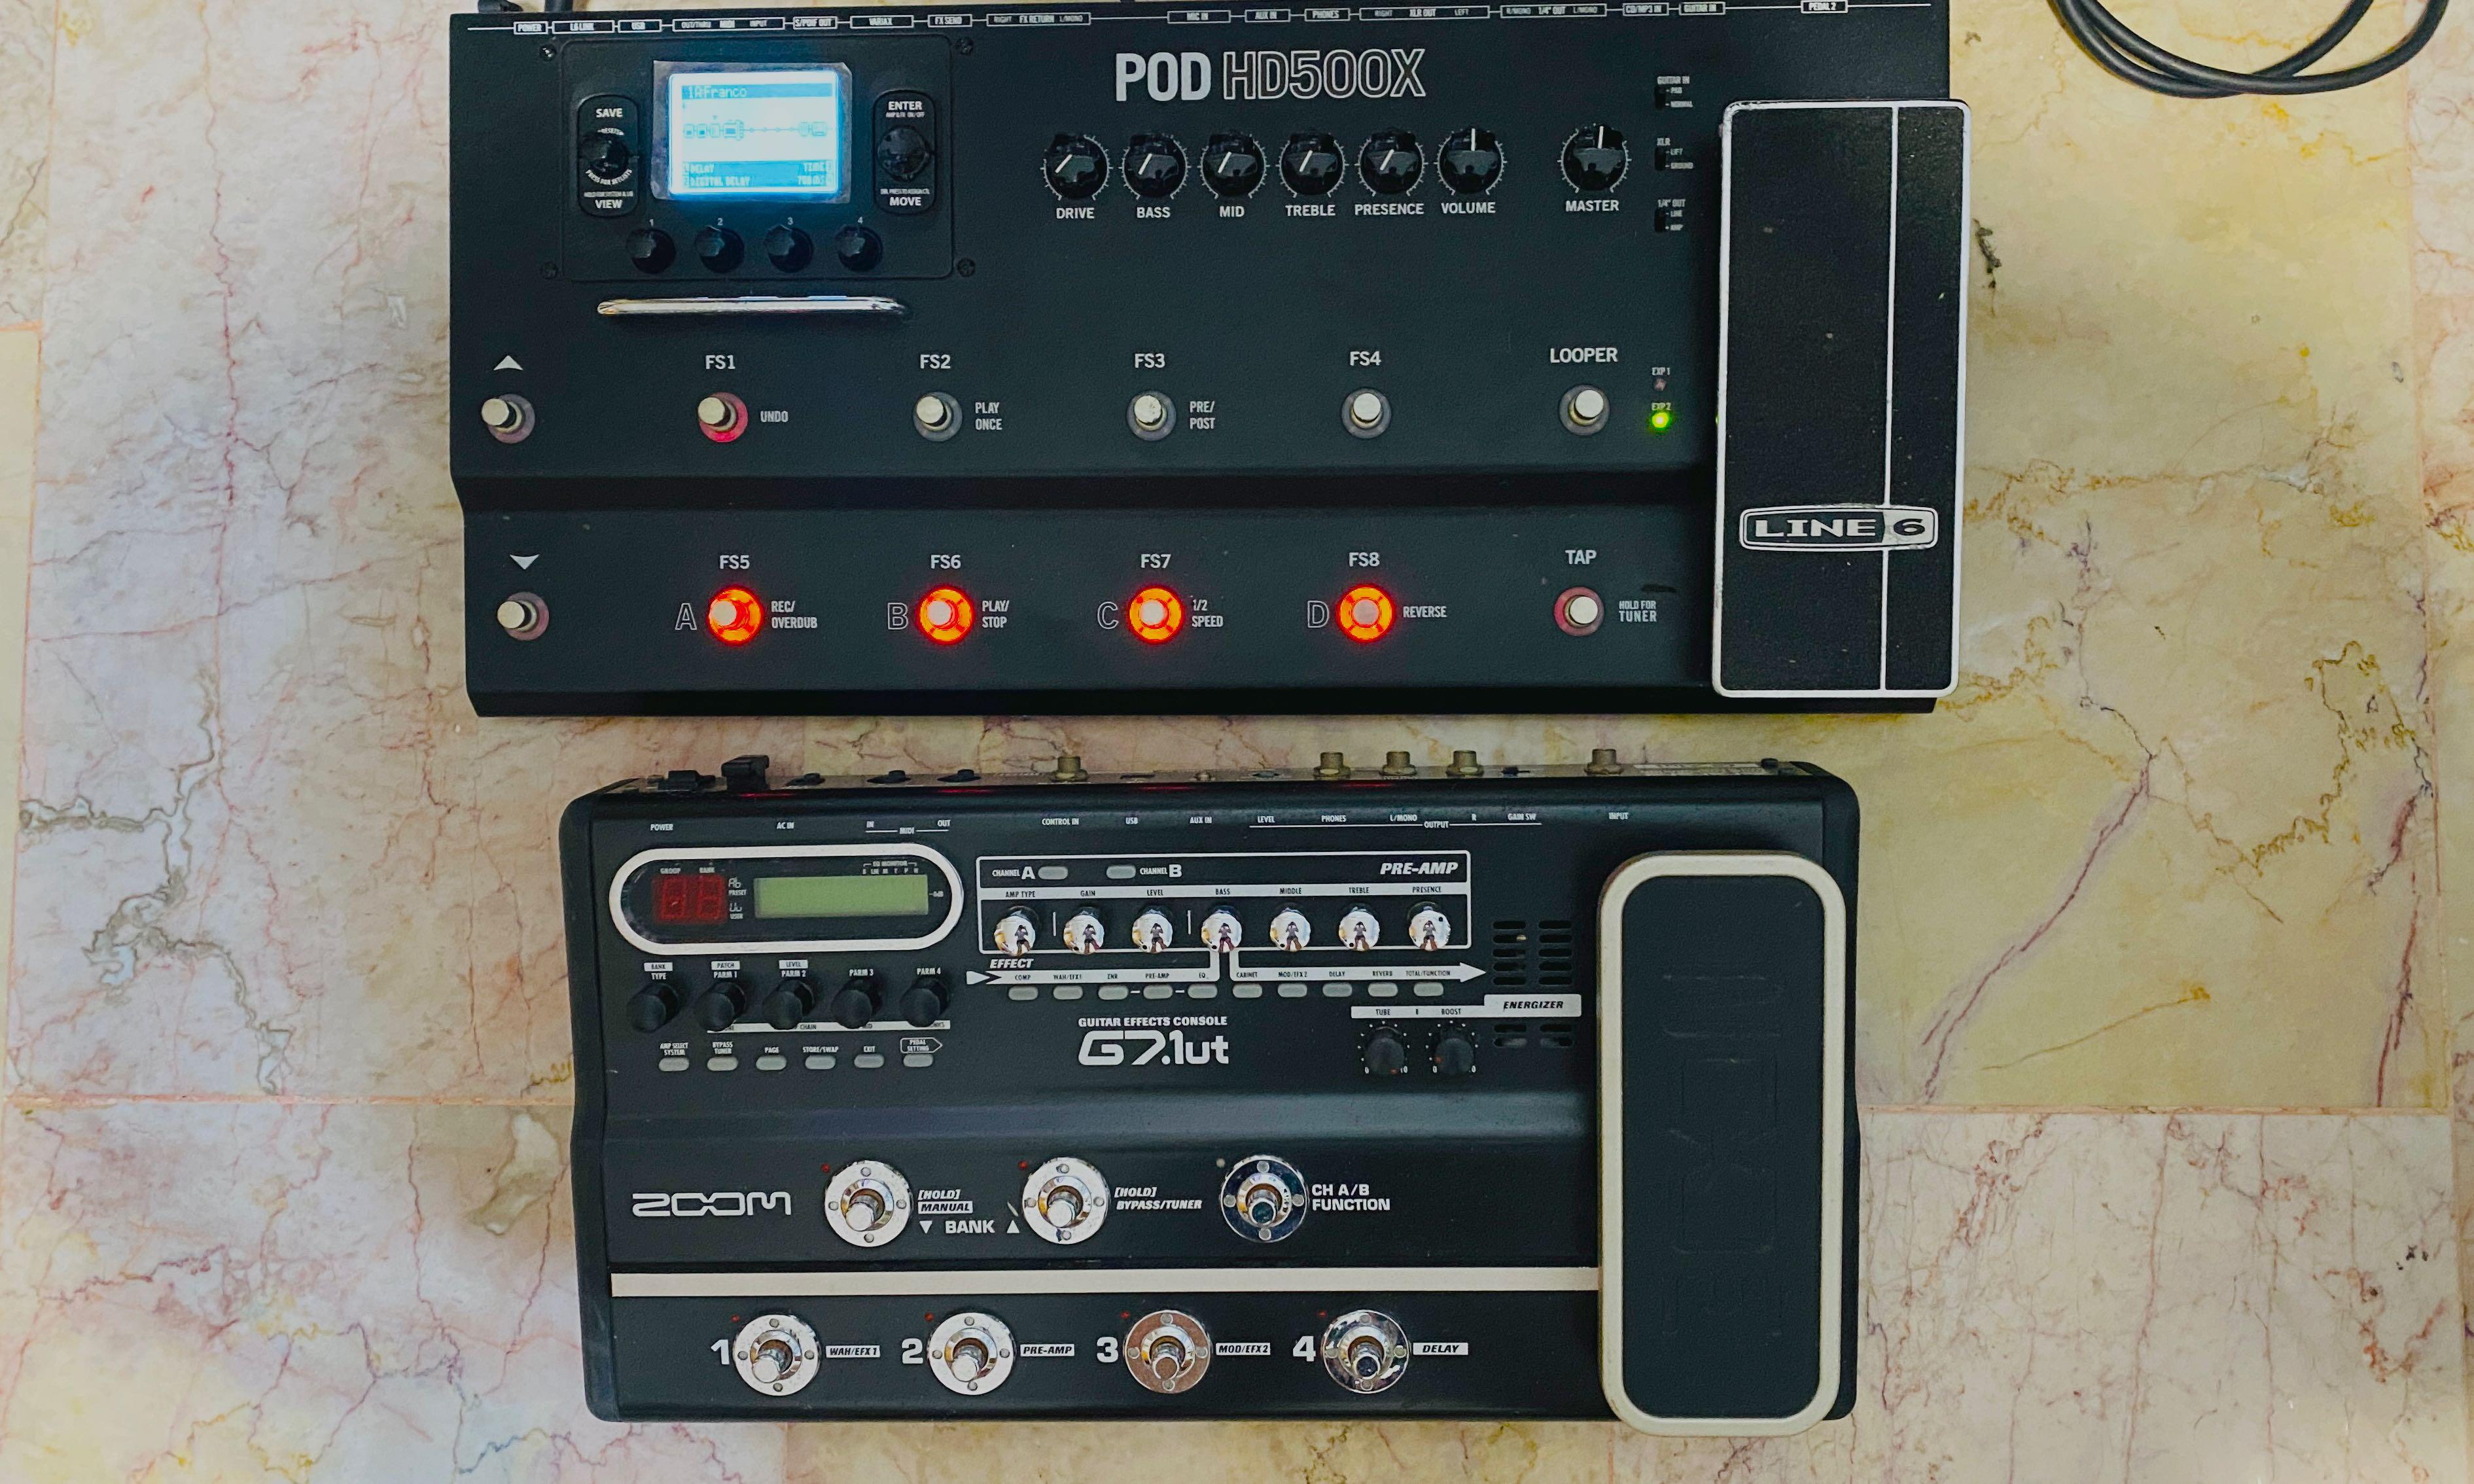 Line 6 PODHD500X Zoom G7.1ut, Hobbies & Toys, Music & Media, Accessories on Carousell